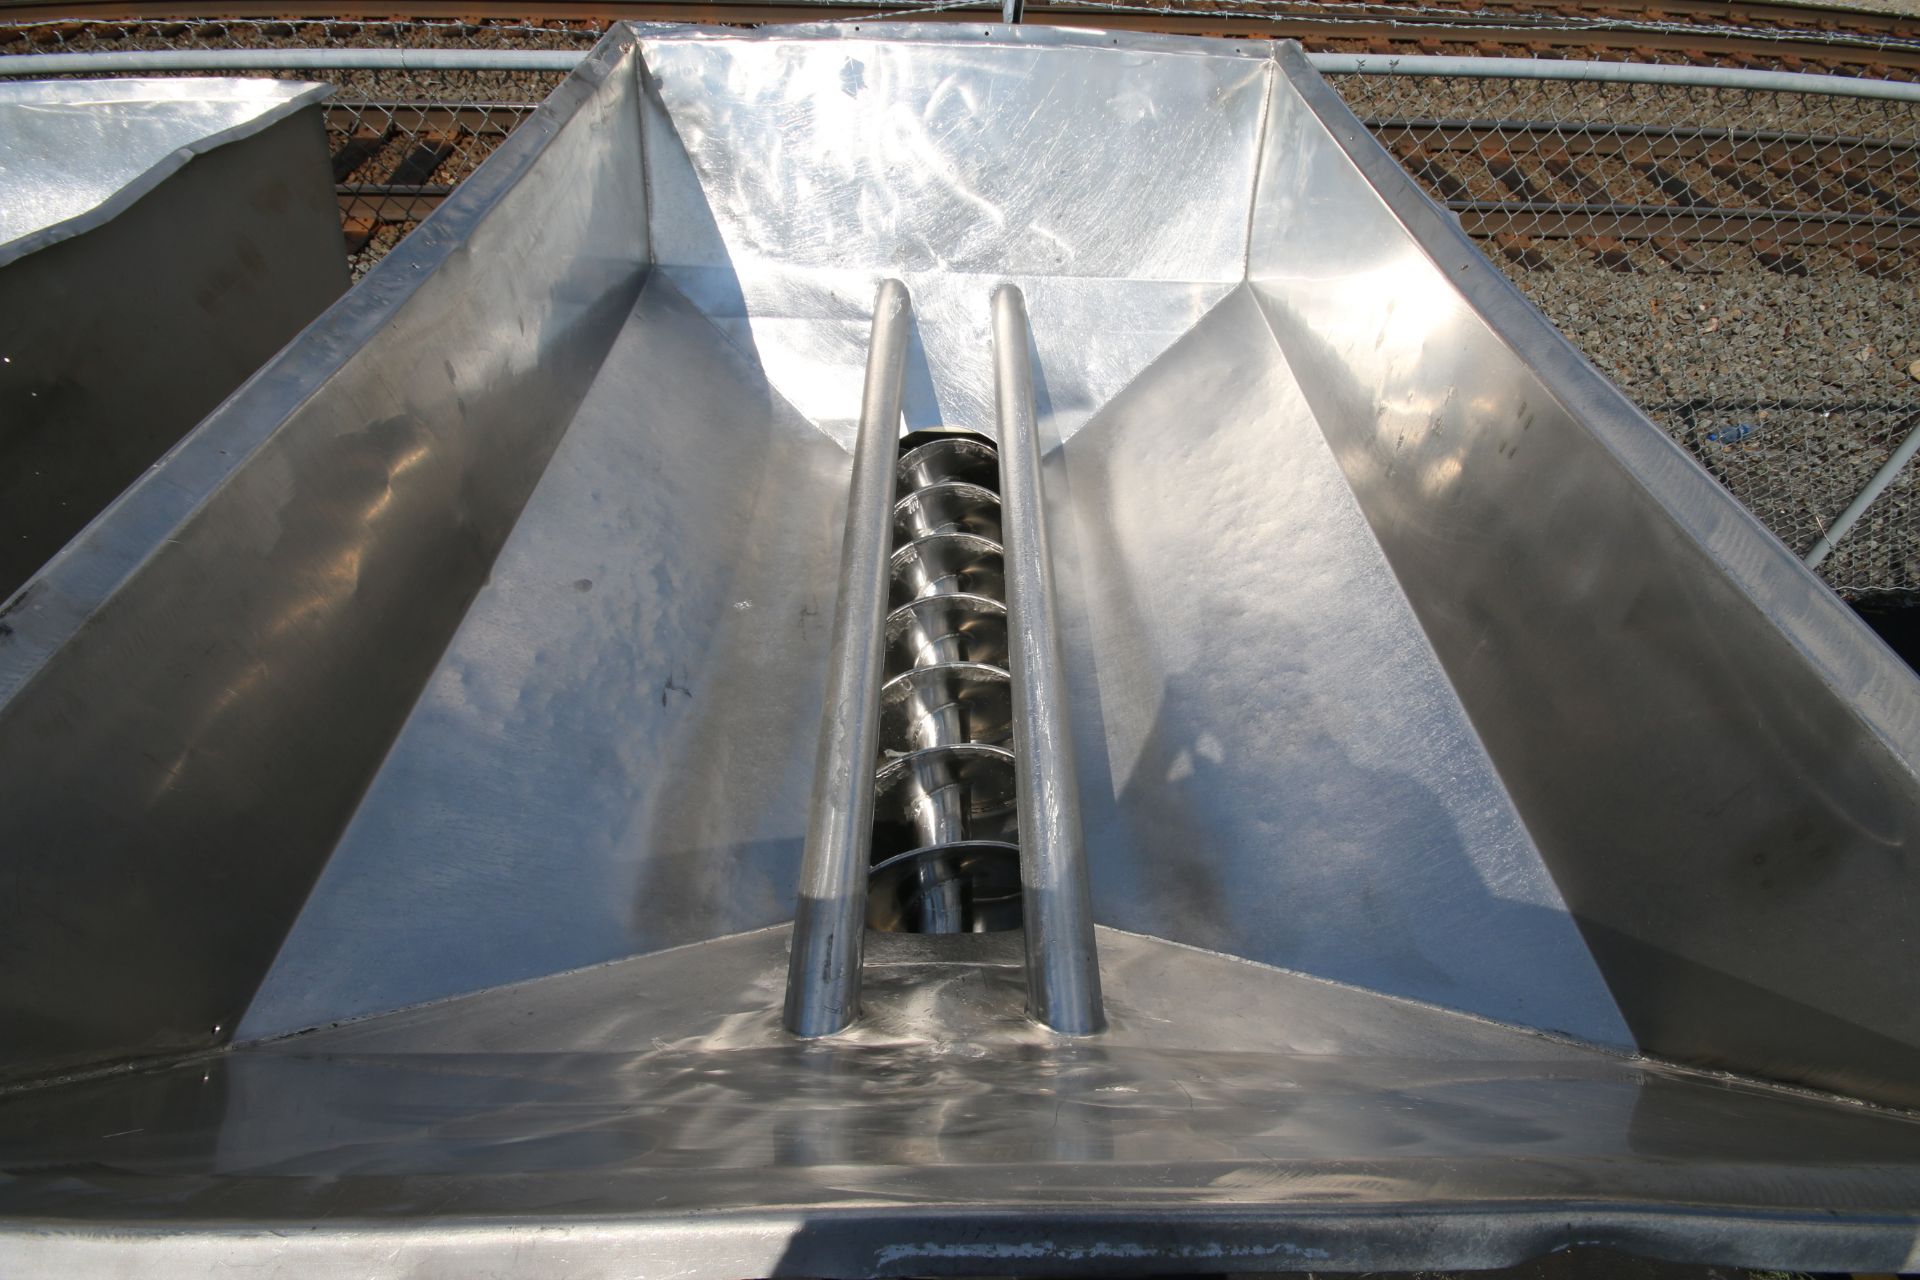 92" L x 60" W x 46" D S/S Auger Feed Hopper with 14" S/S Bottom Powered Auger - Image 2 of 7